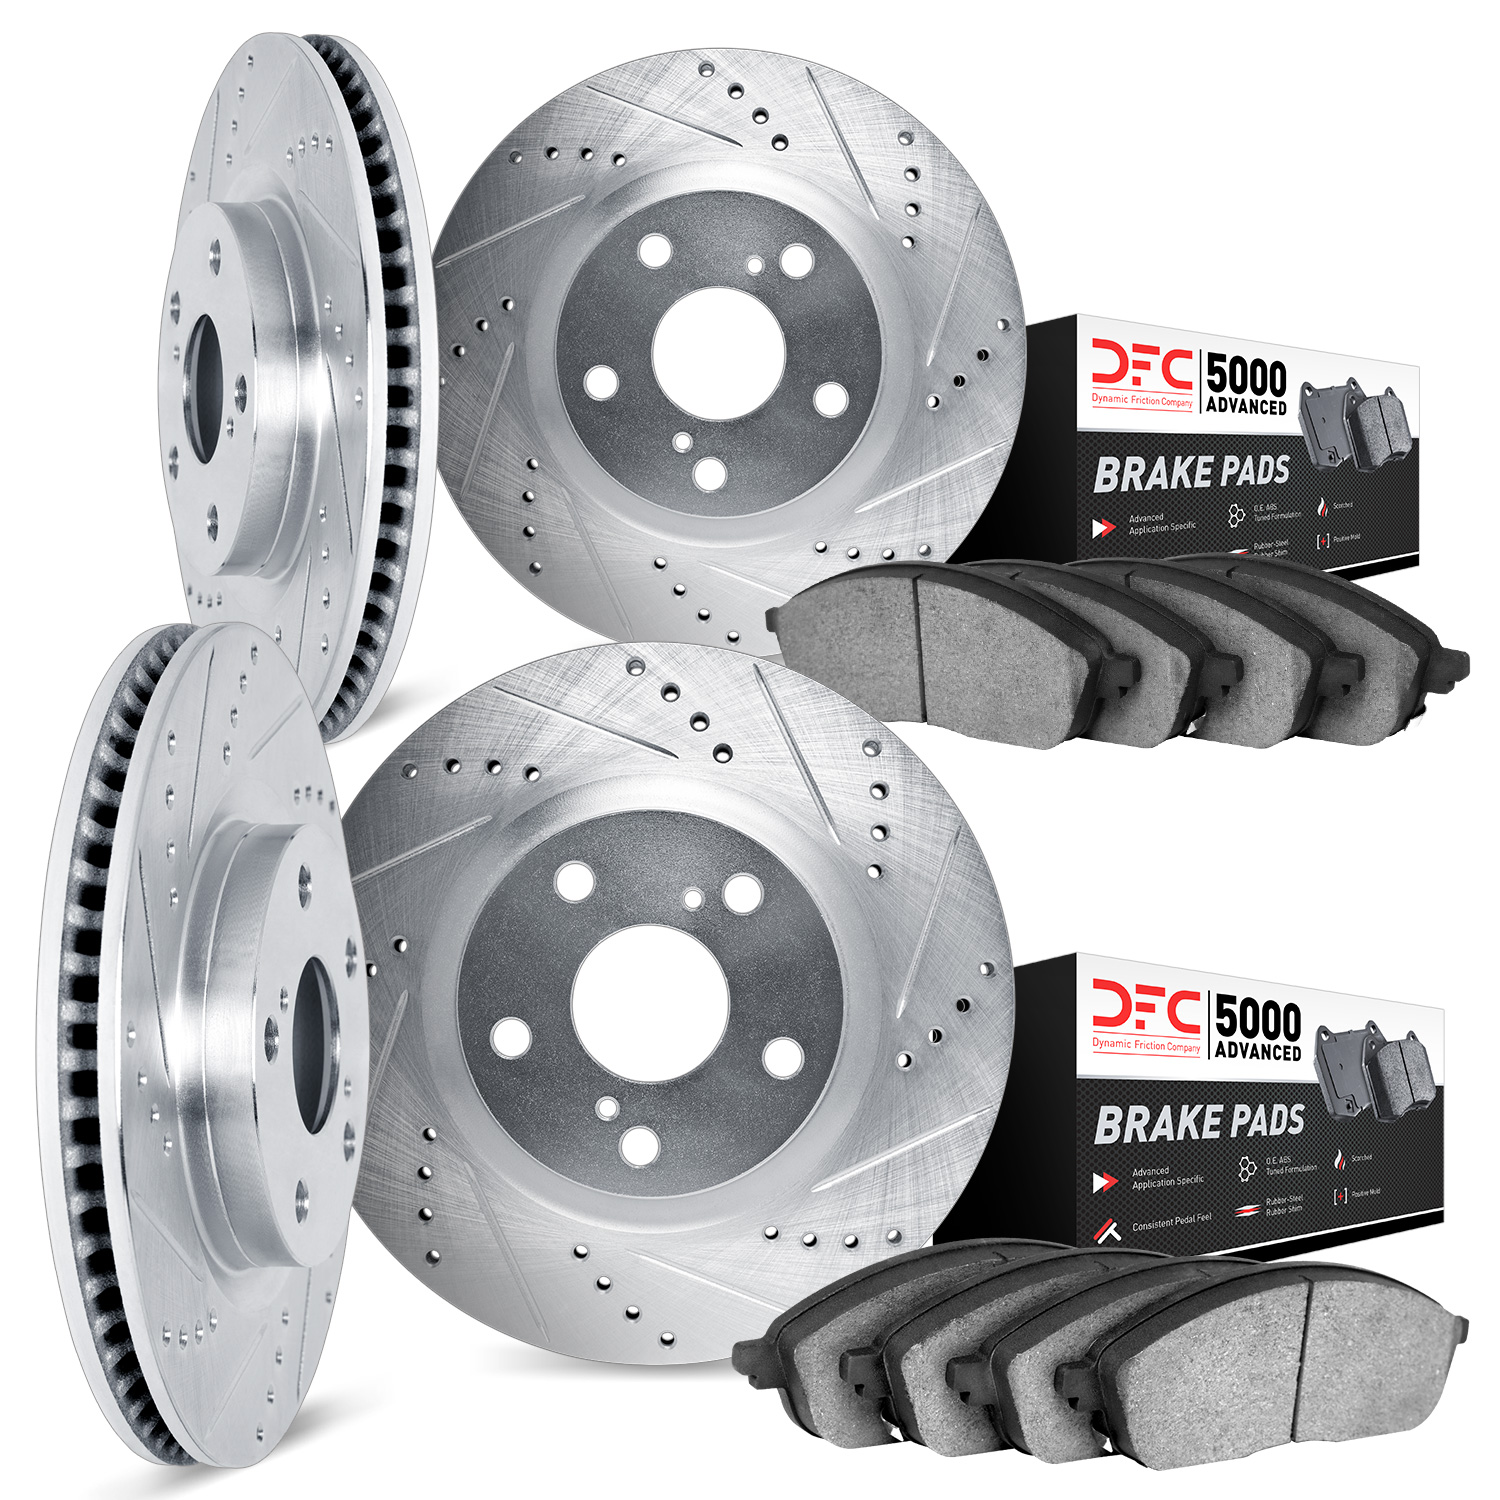 7504-20007 Drilled/Slotted Brake Rotors w/5000 Advanced Brake Pads Kit [Silver], 2013-2015 Jaguar, Position: Front and Rear